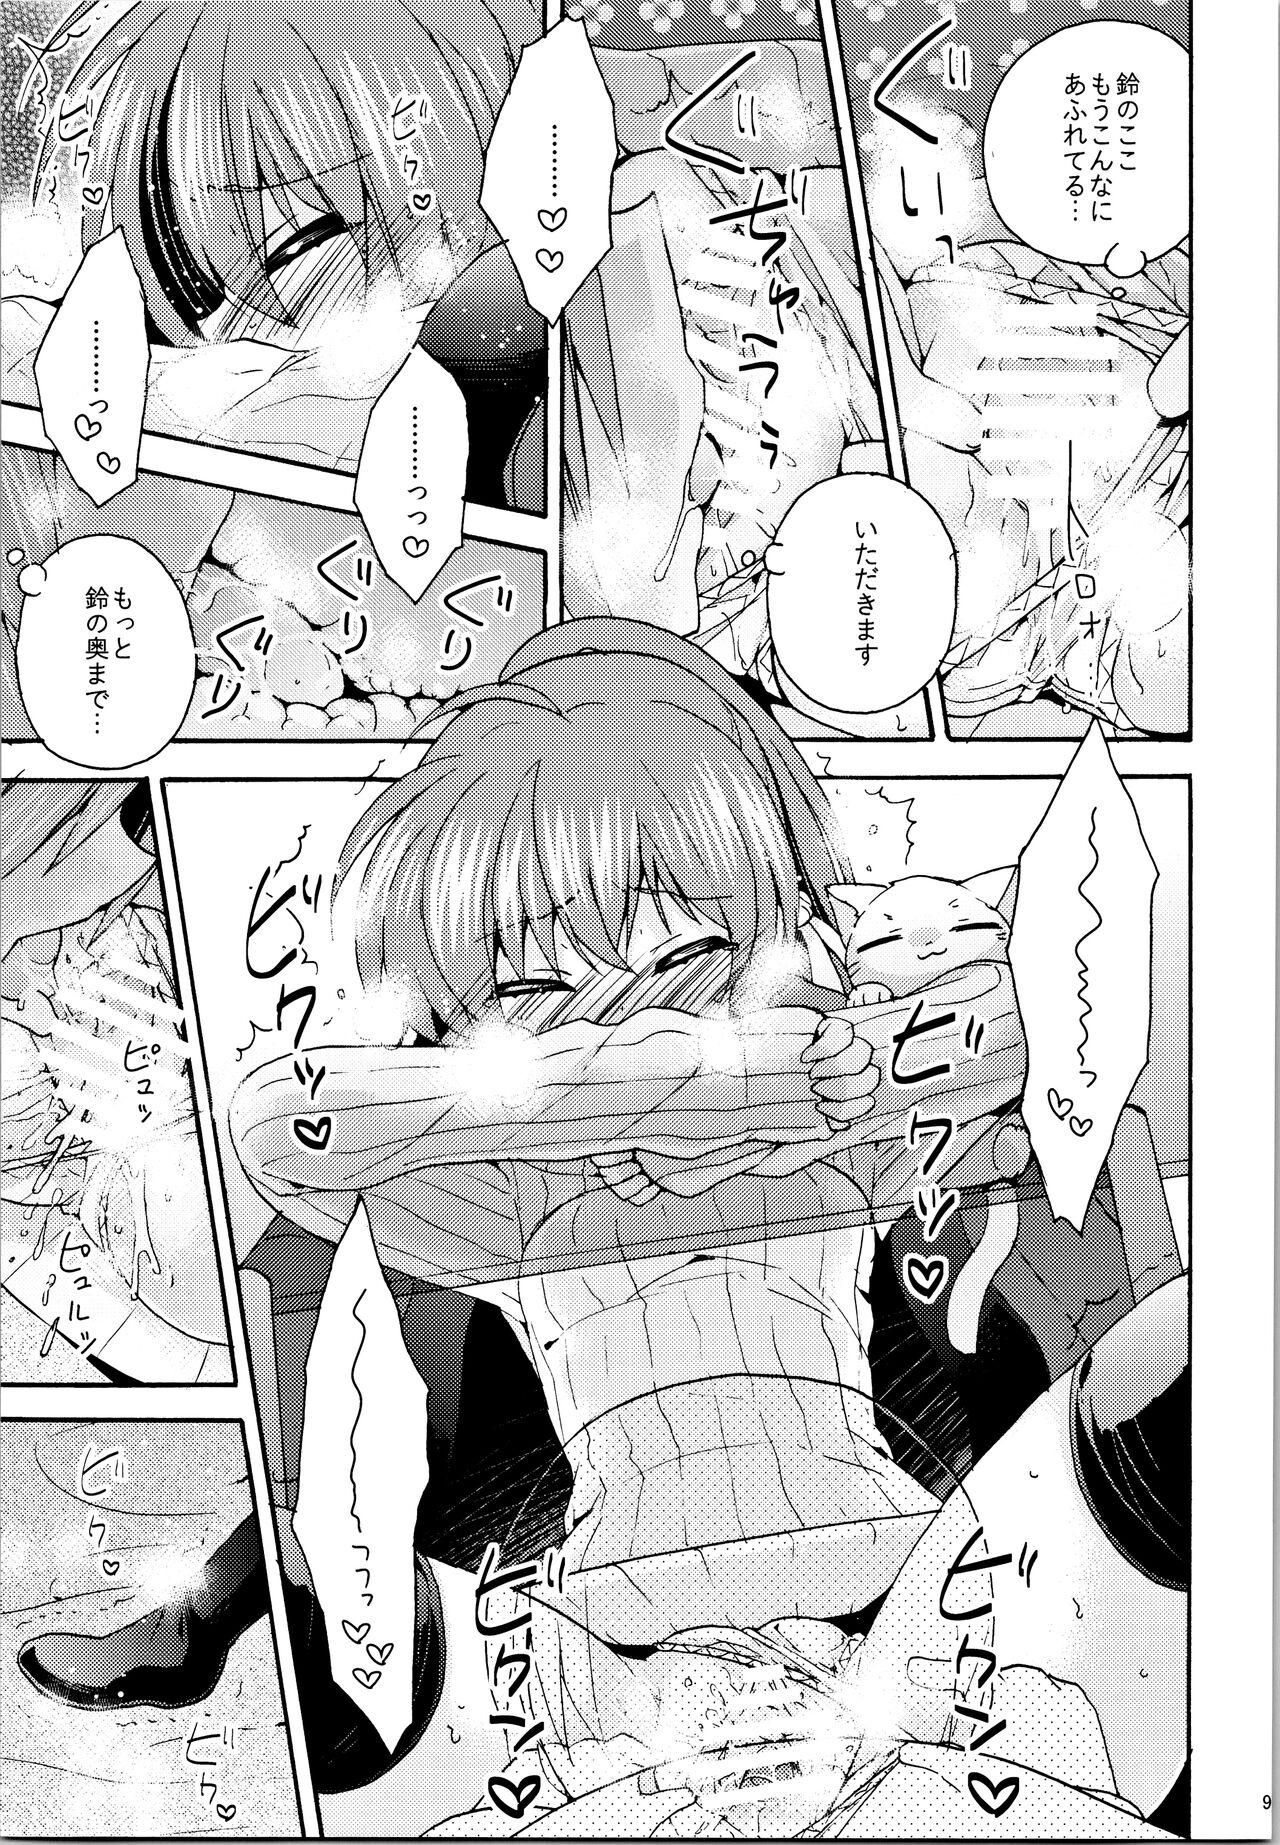 Sislovesme Just A Few More Nights - Little busters Les - Page 8